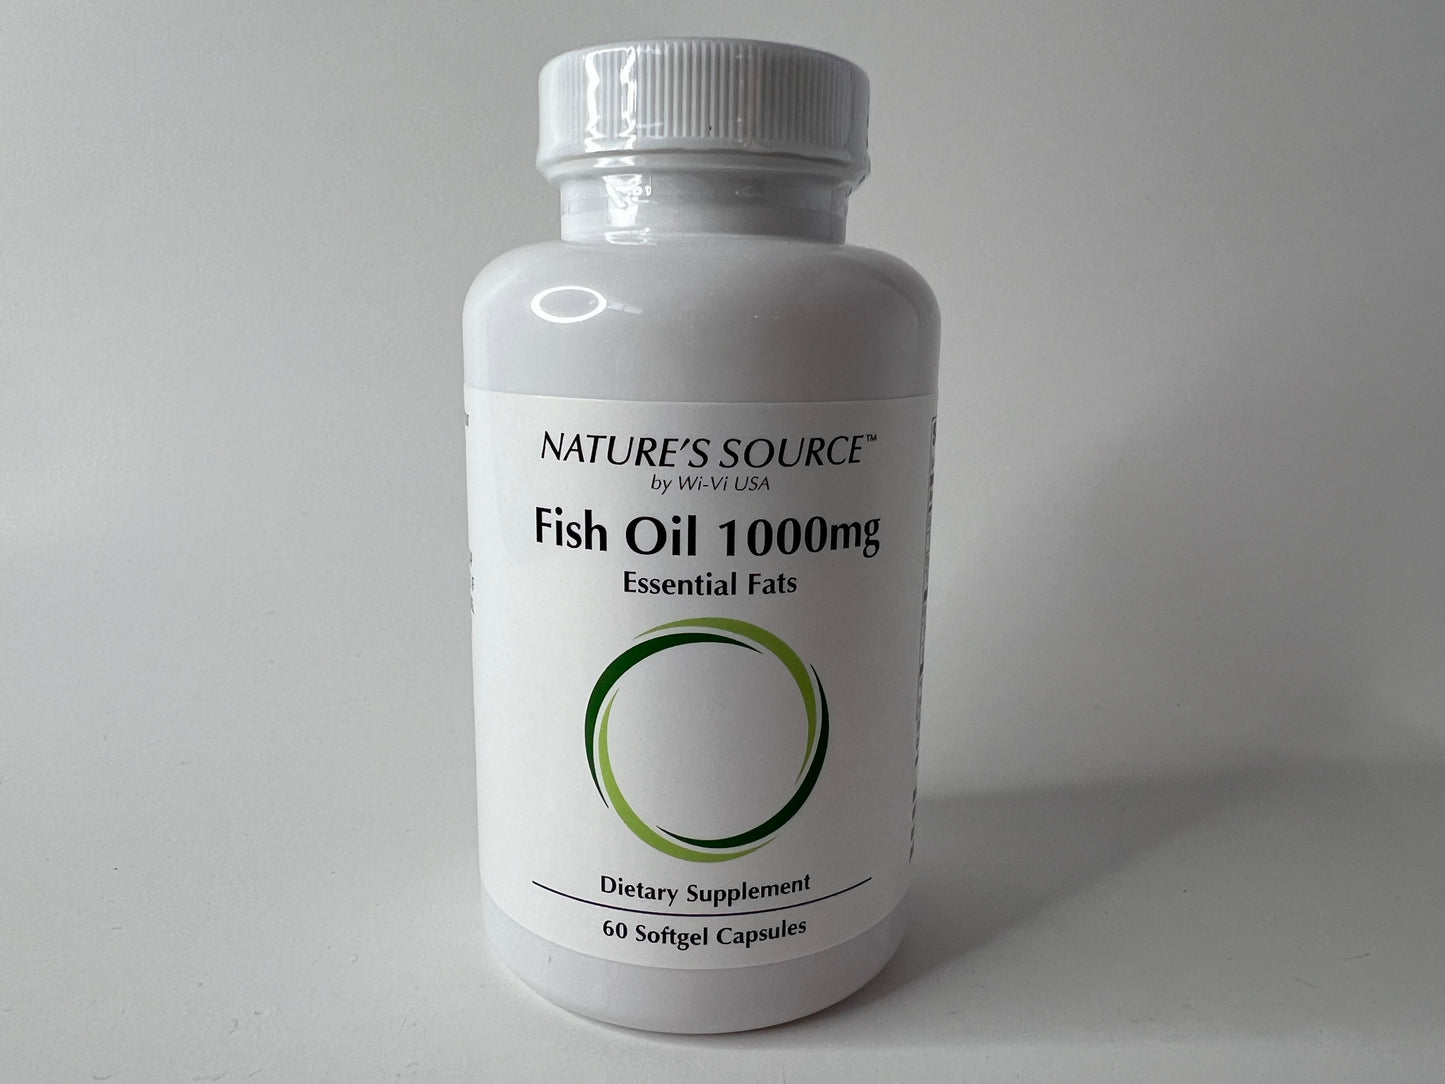 Essential Fats FISH OIL 1000mg (EPA/DHA Super) (60 softgels) by: Nature's Source